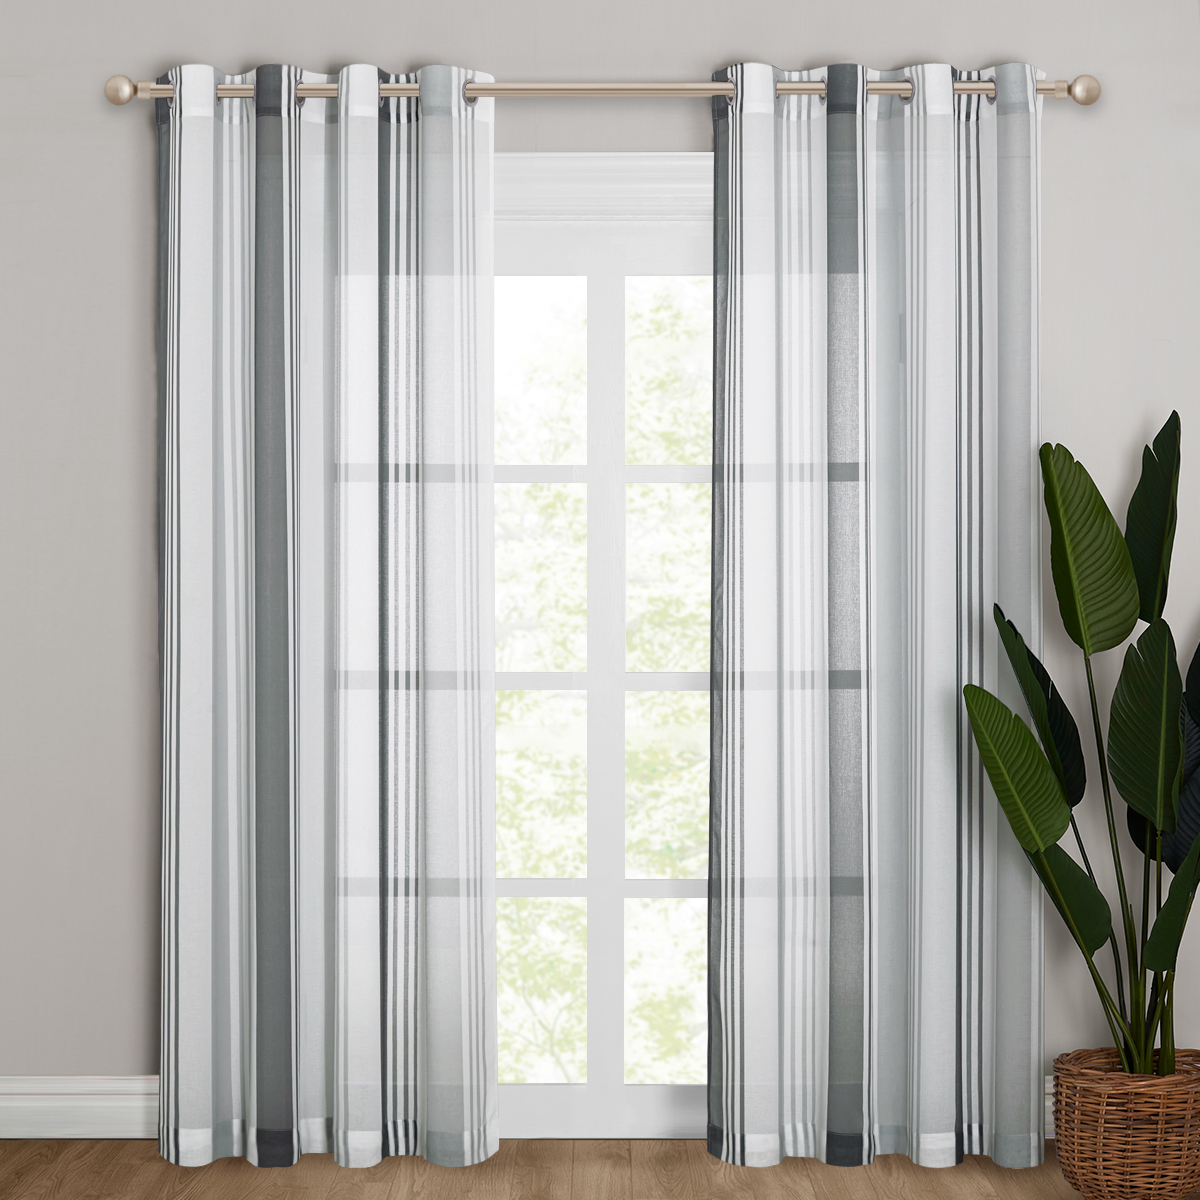 Stripe Sheer Curtain,sold As 1 Panel